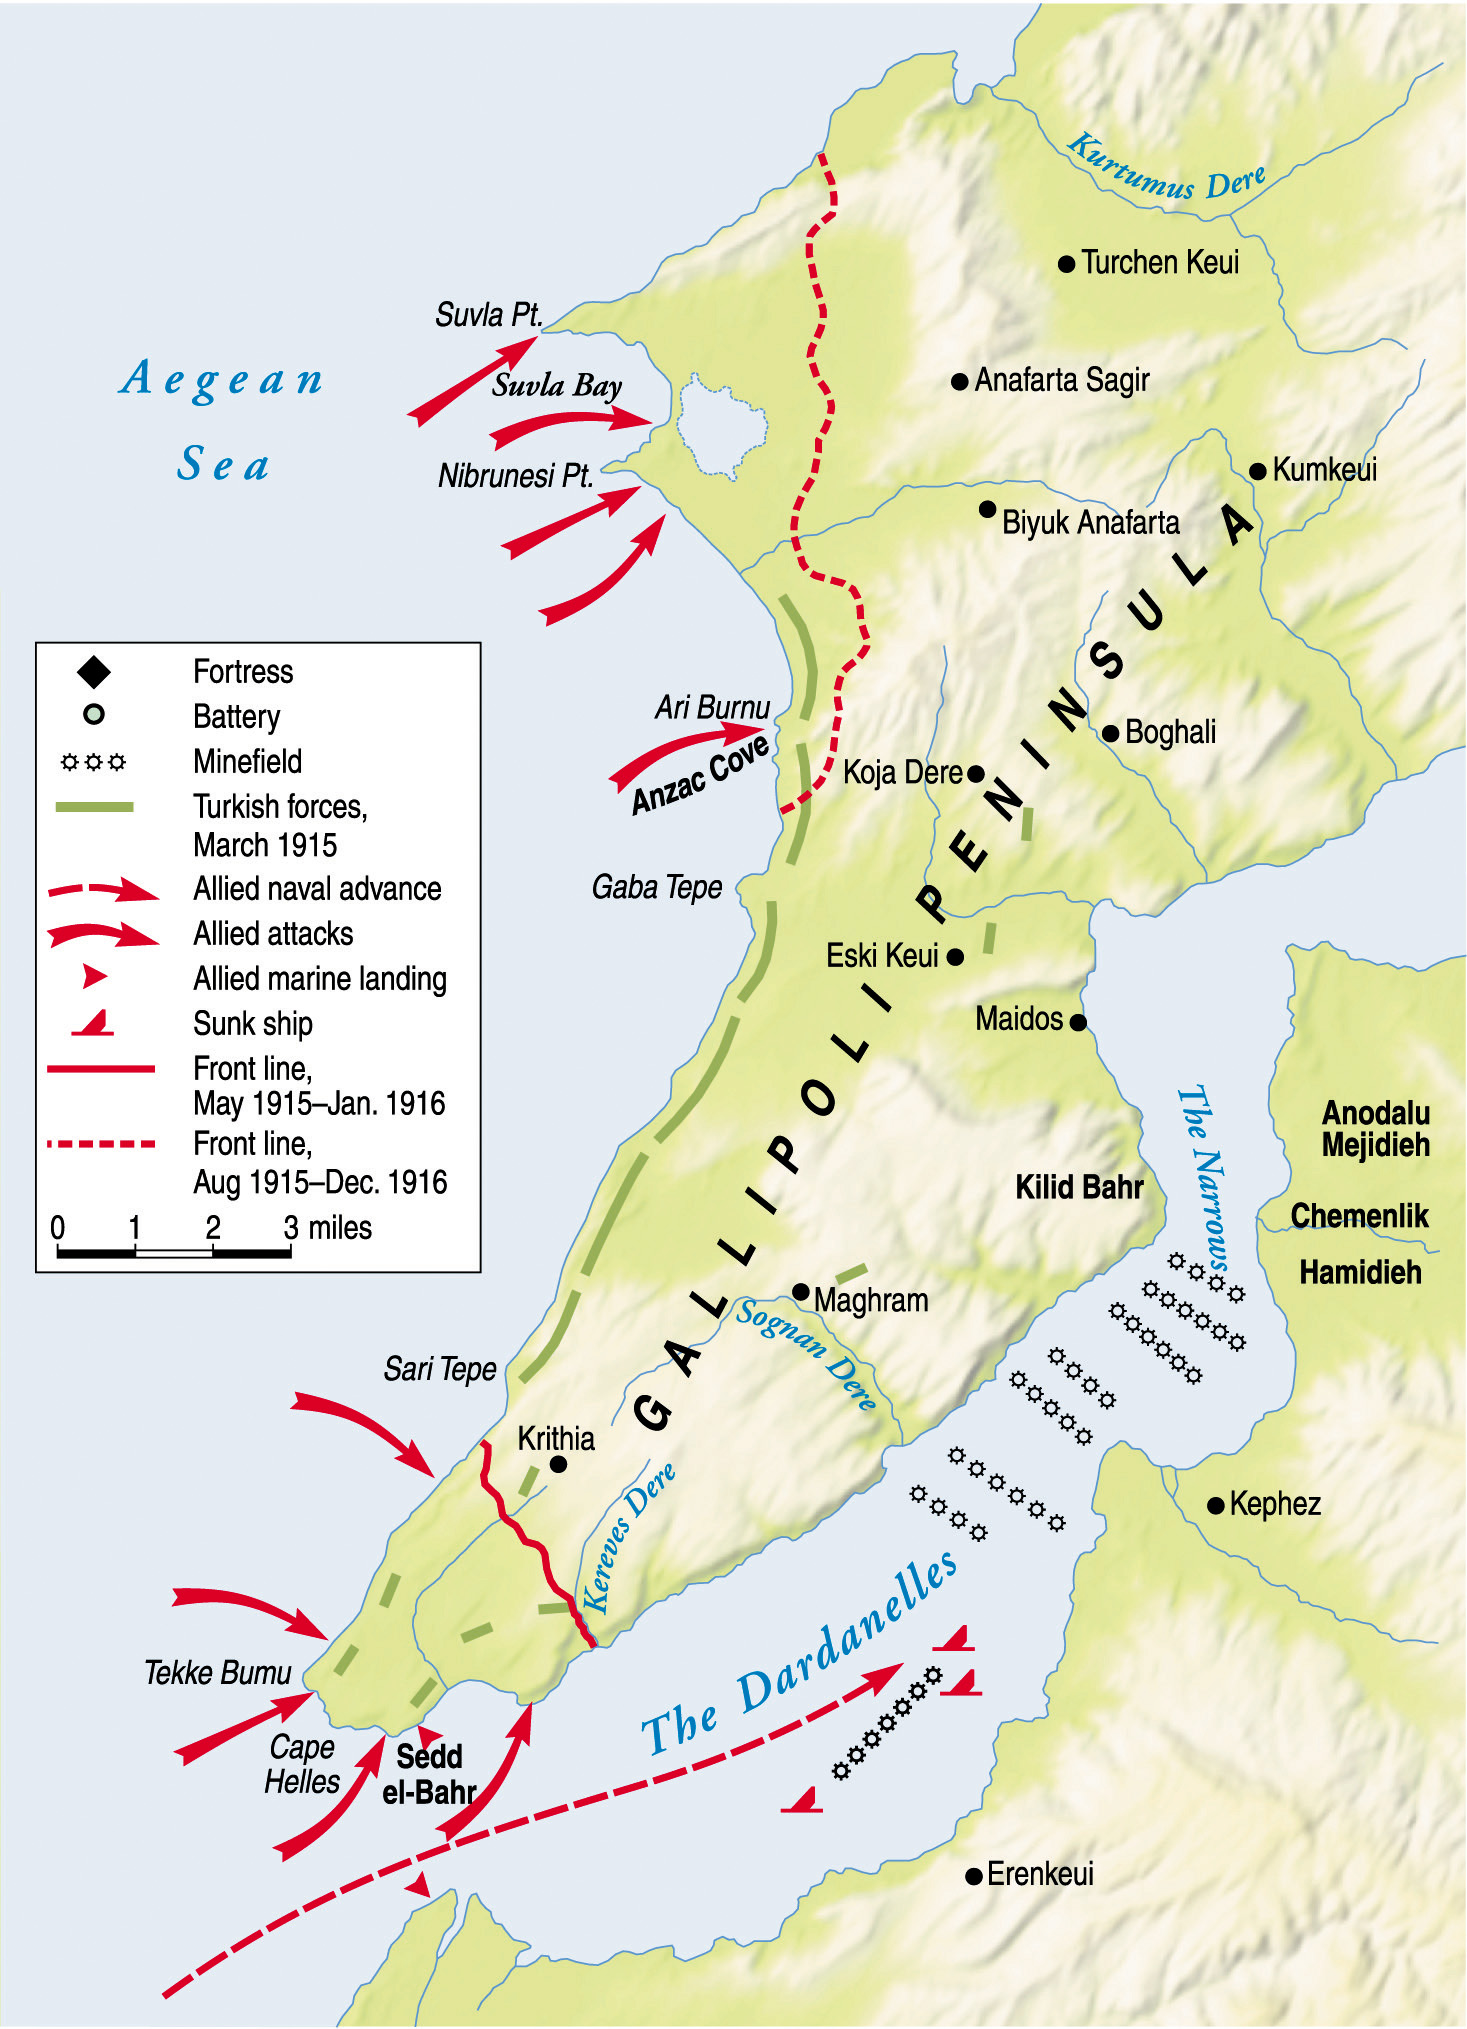 First Lord of the Admiralty Winston Churchill hoped to relieve pressure on the Western Front by attacking the southern flank of the Central Powers, but British naval and land assaults at Gallipoli failed. The British and ANZAC infantry forces never reached Kilid Bahr Plateau, where they had hoped to establish batteries to control the Narrows. 